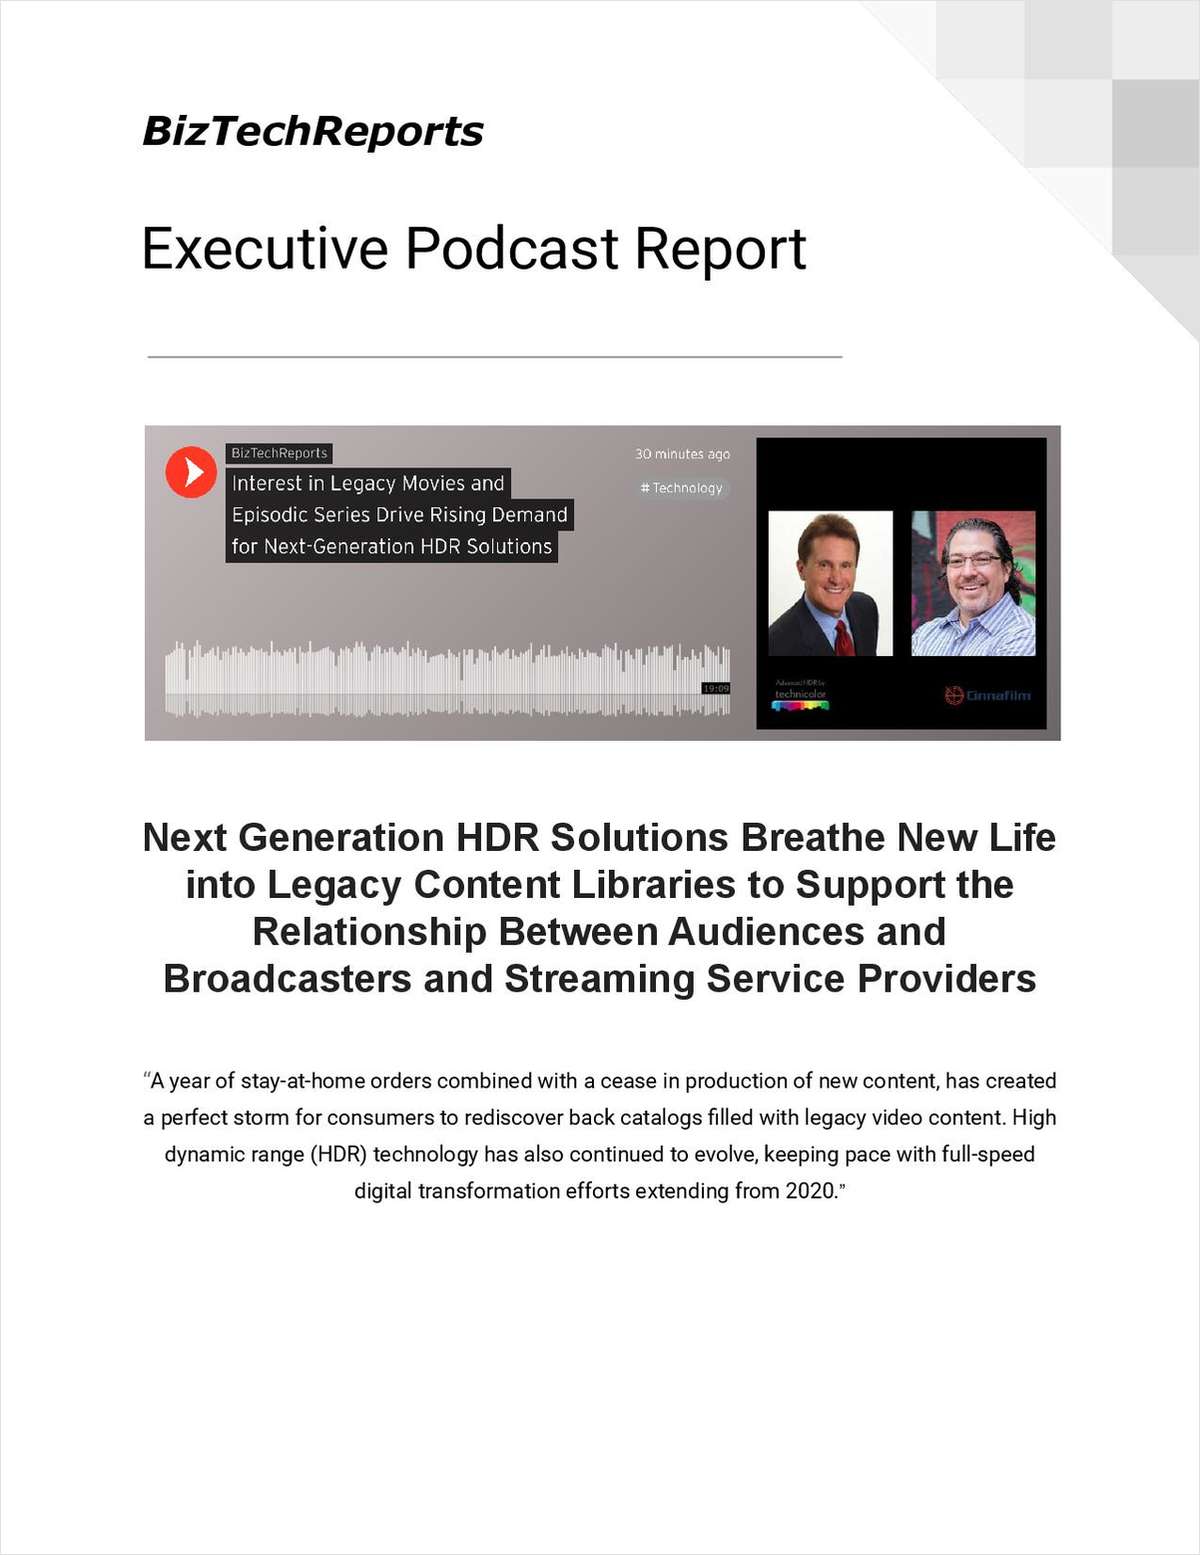 Next Generation HDR Solutions Breathe New Life into Legacy Content Libraries